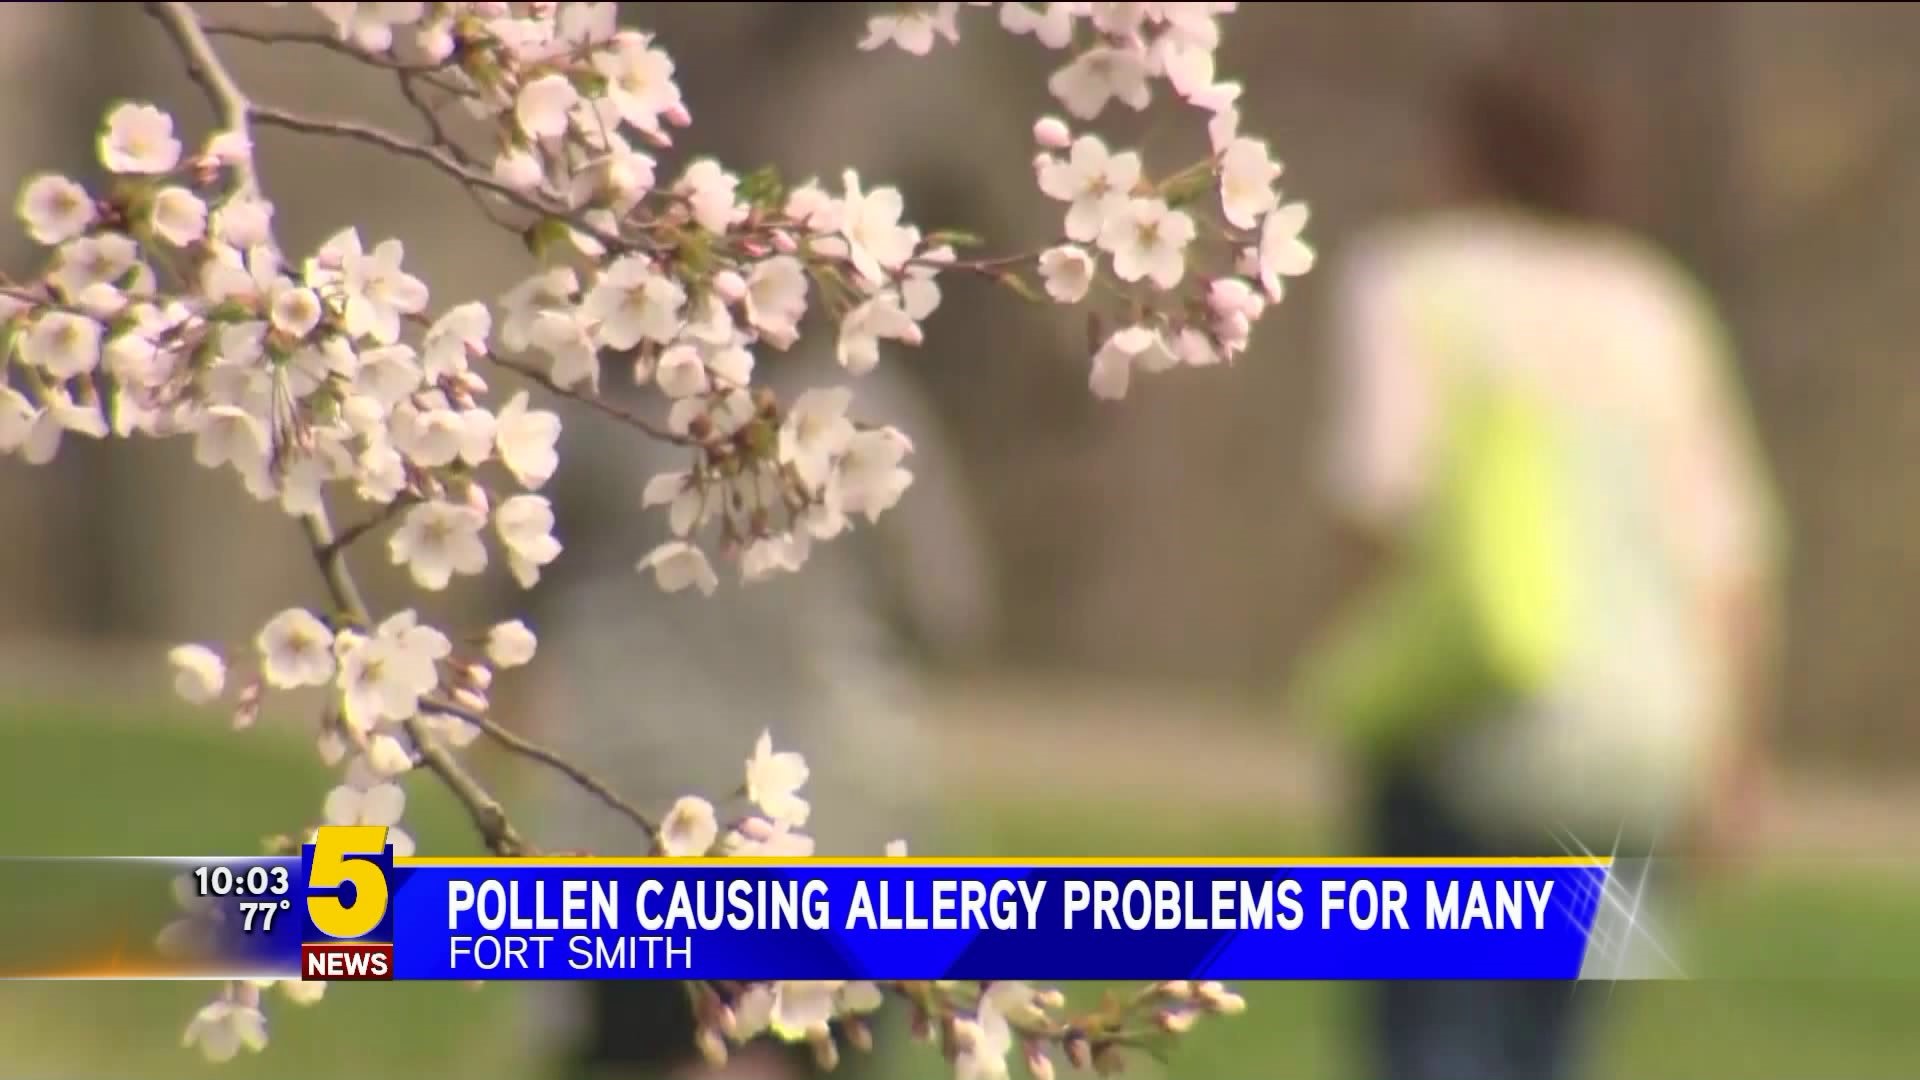 Pollen Causing Allergy Issues For Many